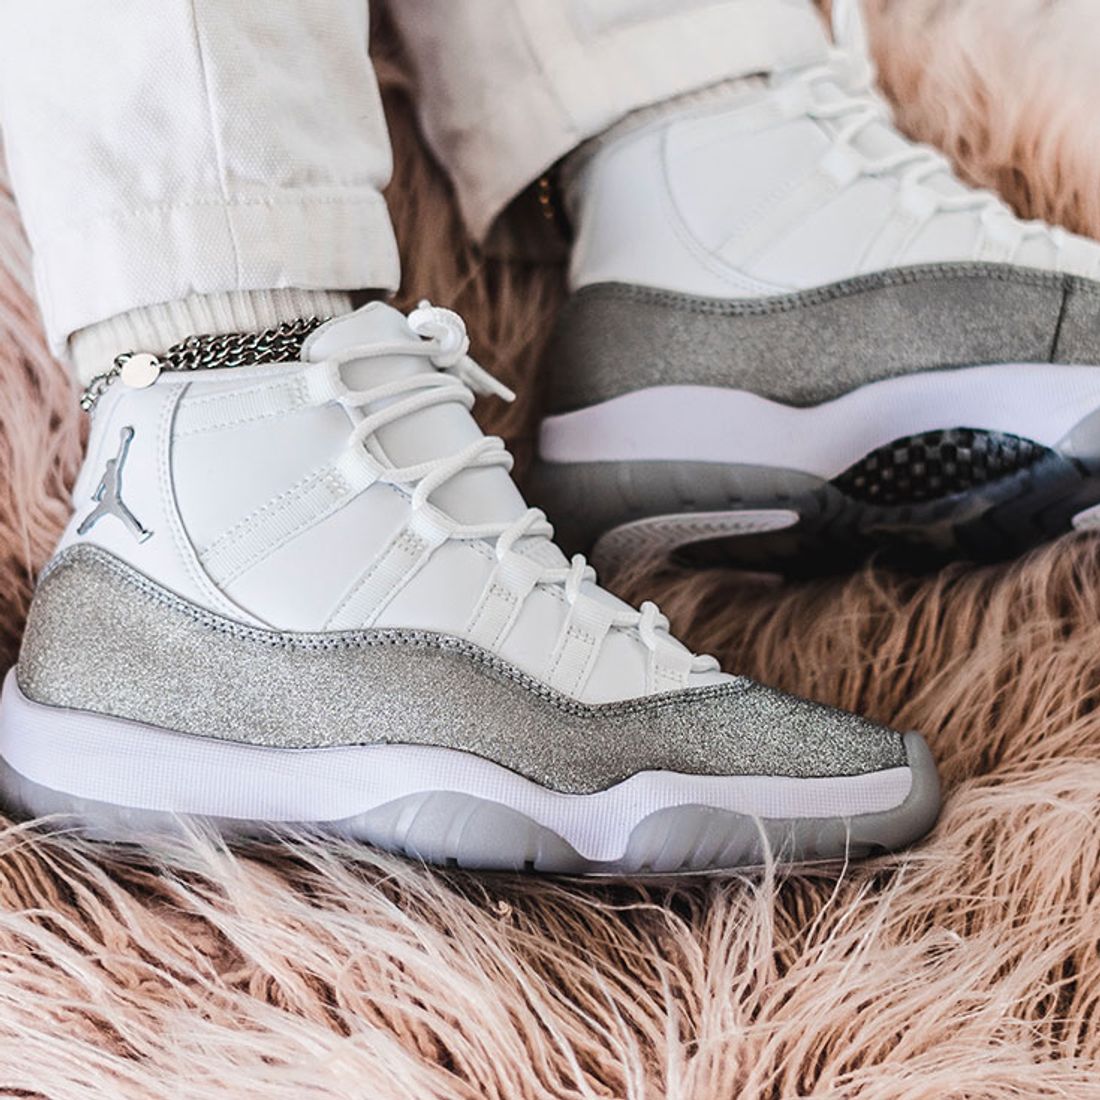 Portal afternoon assign The Air Jordan 11 'Metallic Silver' Delivers Some Serious Sparkle - Sneaker  Freaker